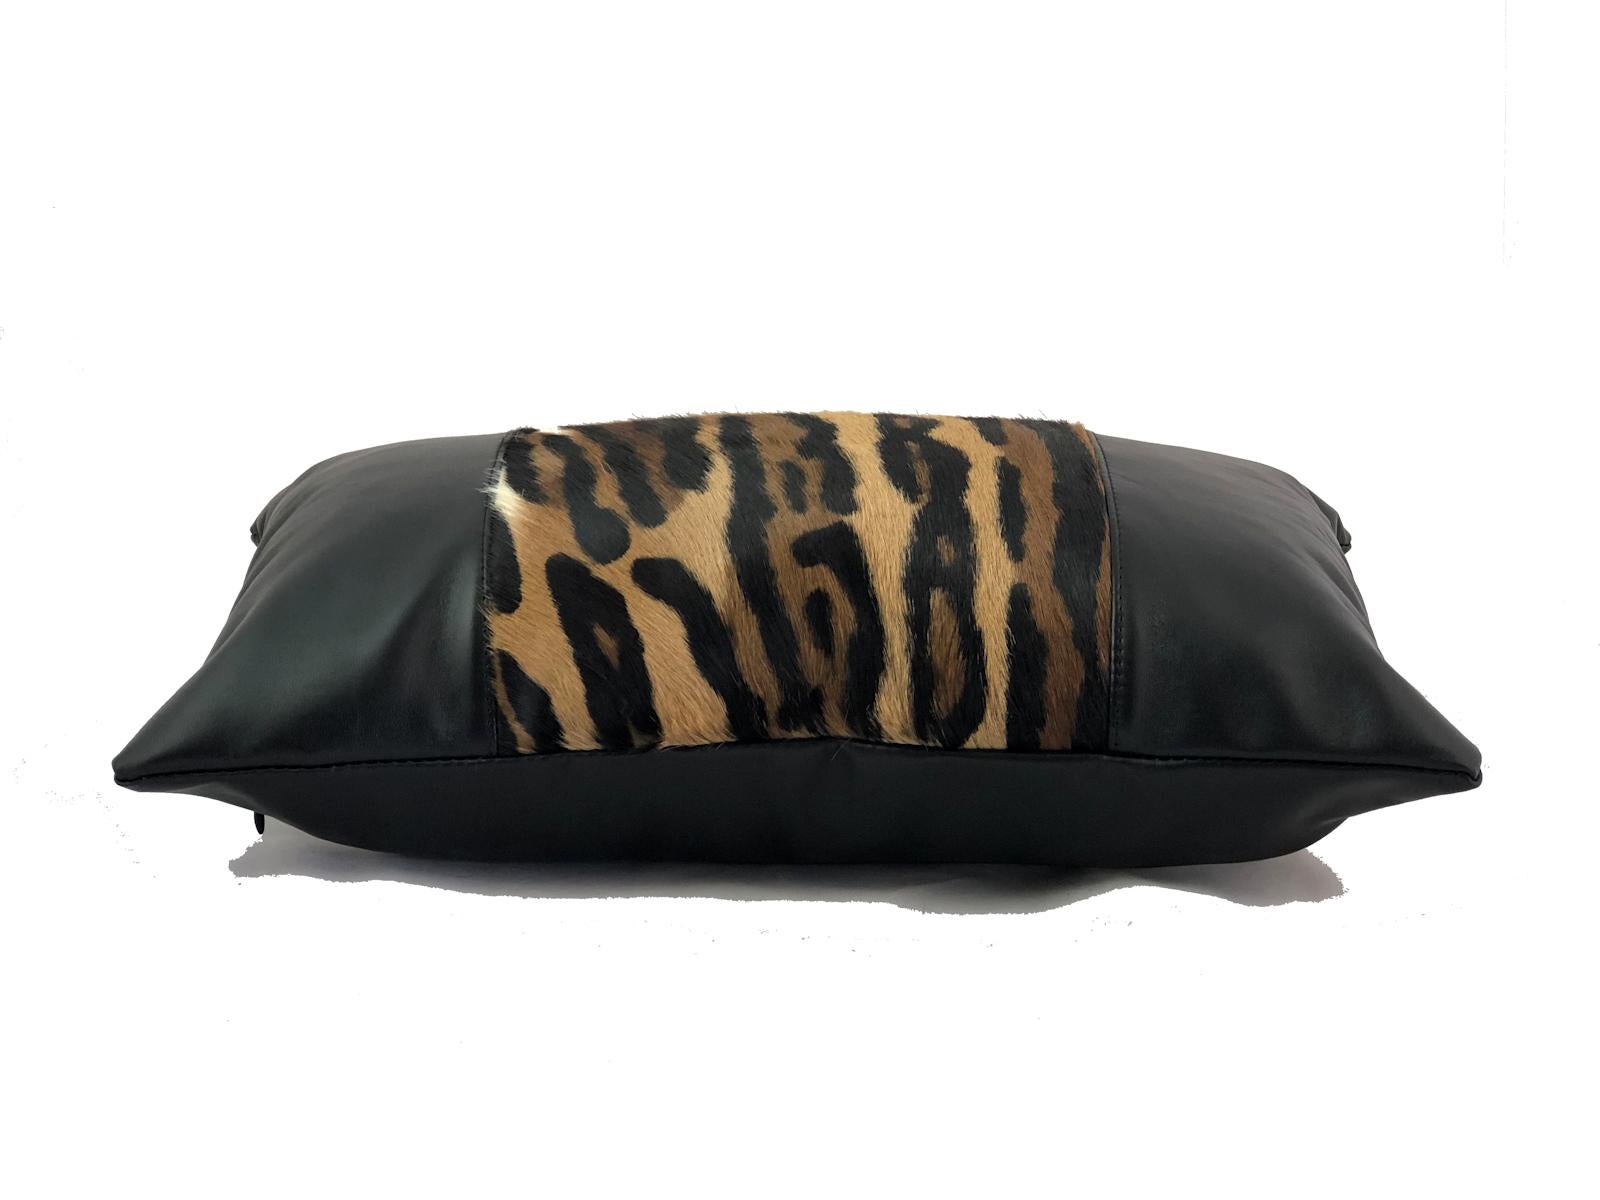 Australian Leopard Print Lumbar Pillow with Black Leather For Sale